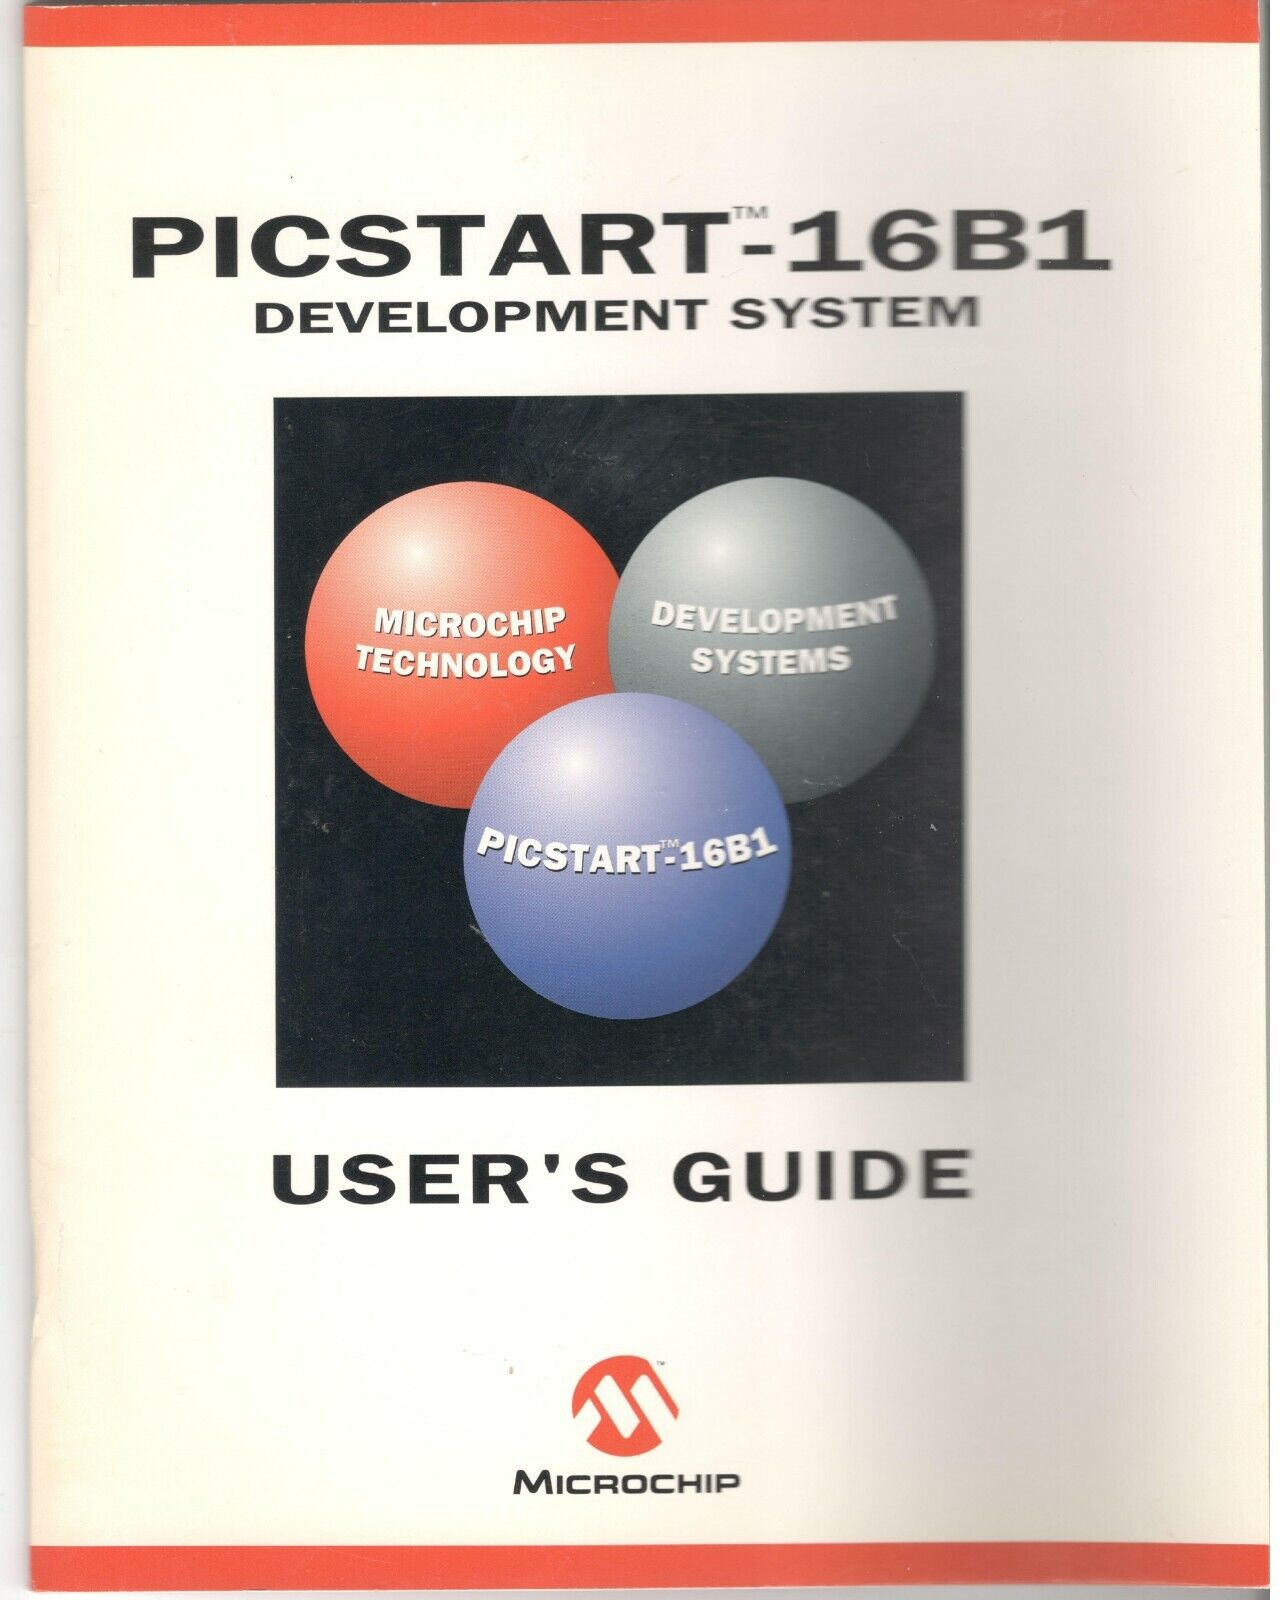 Microchip Technology PICSTART-16B1 Development System Credence New Orleans Mall User's Gui